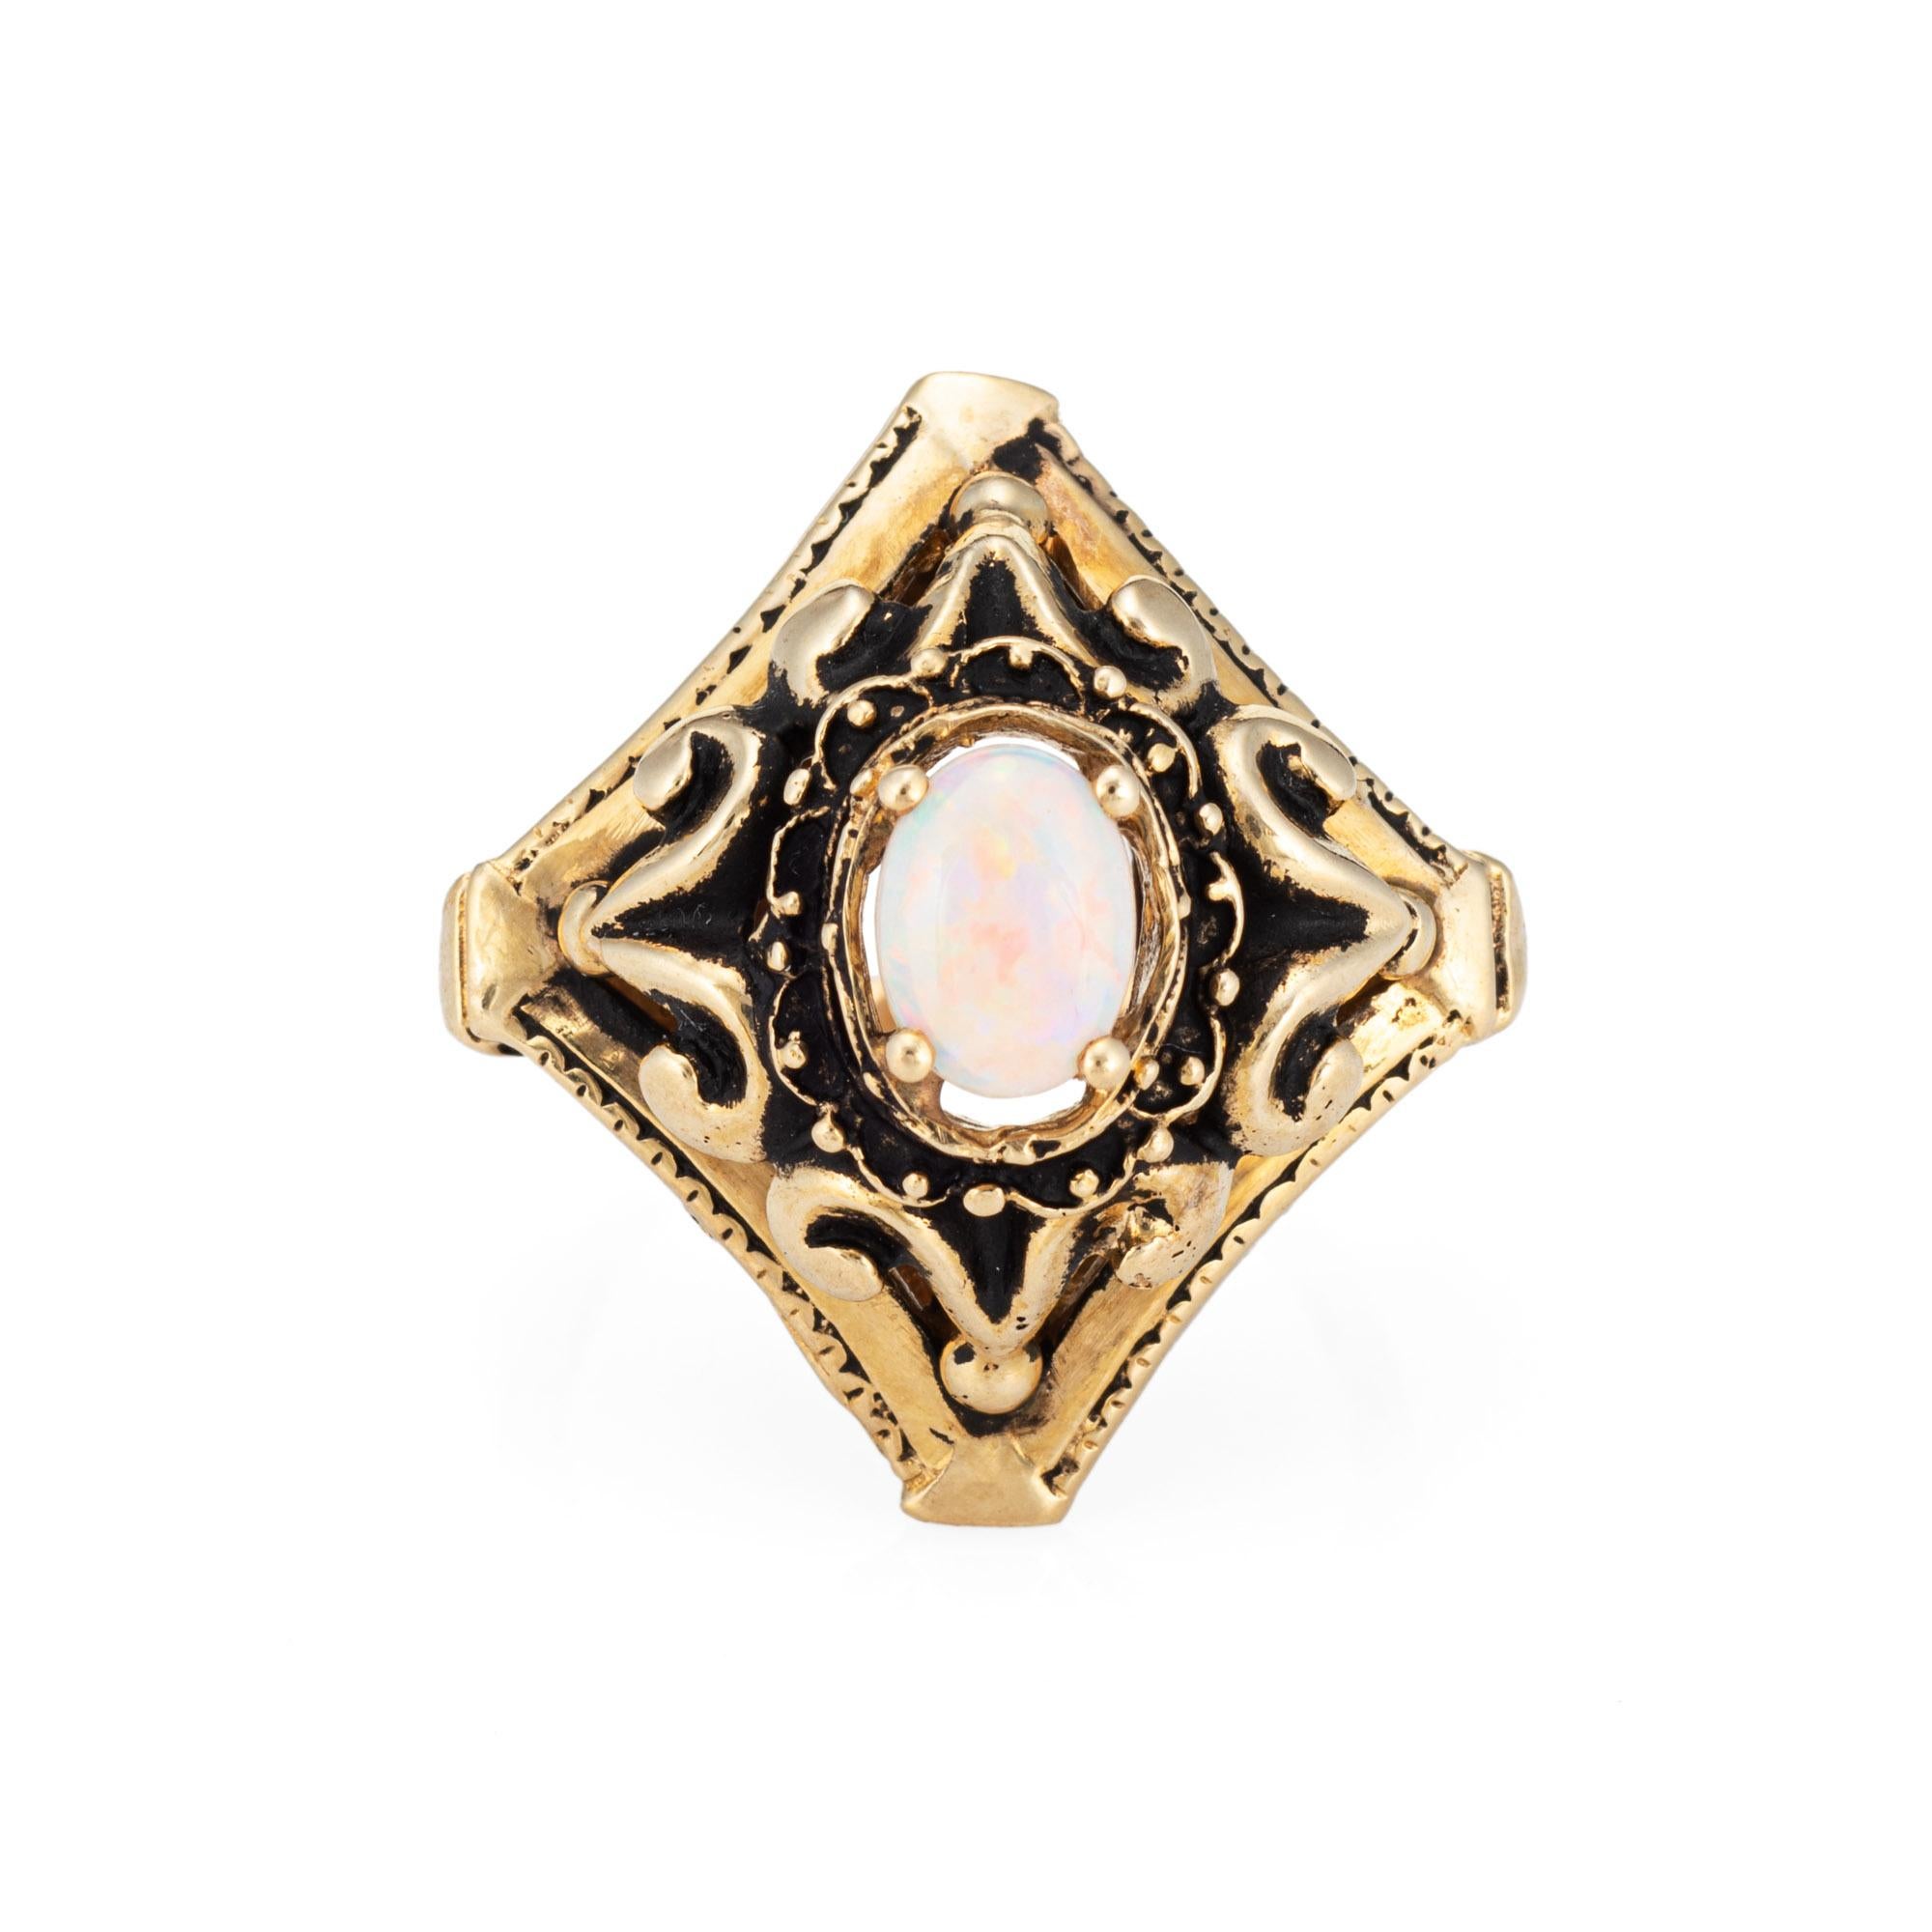 Stylish vintage opal cocktail ring crafted in 14 karat yellow gold (circa 1960s to 1970s). 

Center set opal measures 6mm x 5mm.  

The natural opal shows green to purple, orange, yellow and bits of red color flashes. The mount has a layered design